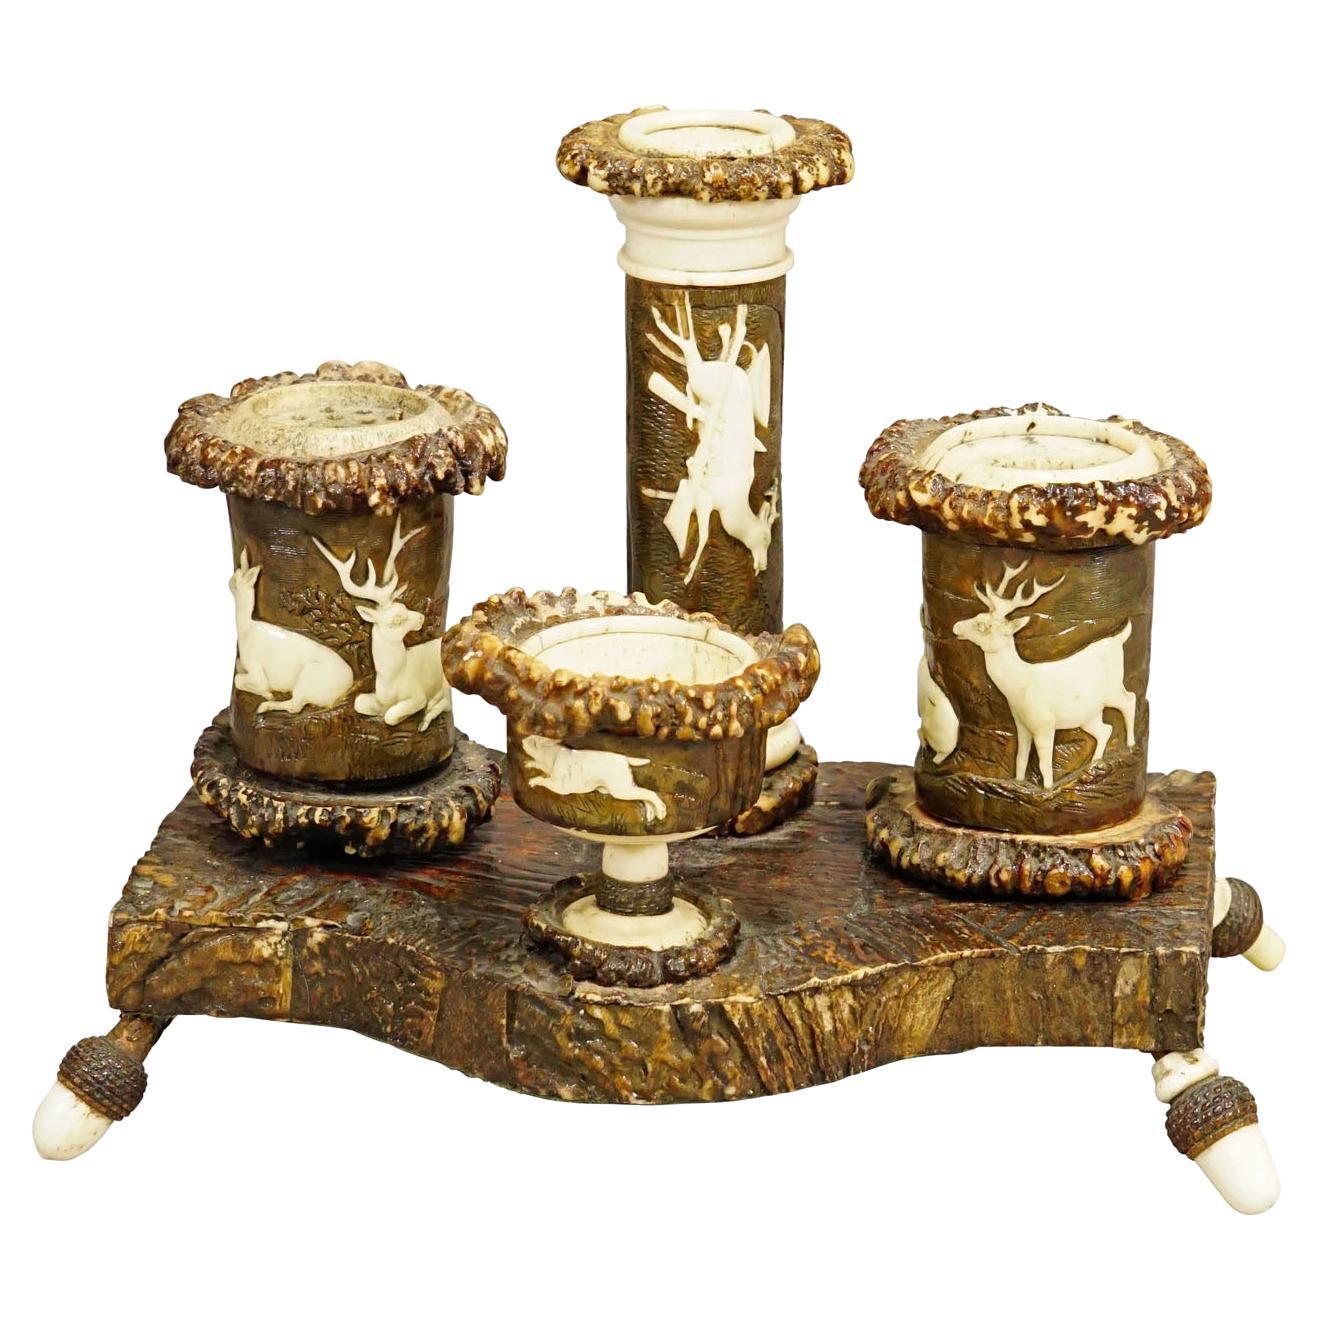 Rare Antler Desk Standish with Elaborate Carvings, Germany ca. 1840 For Sale